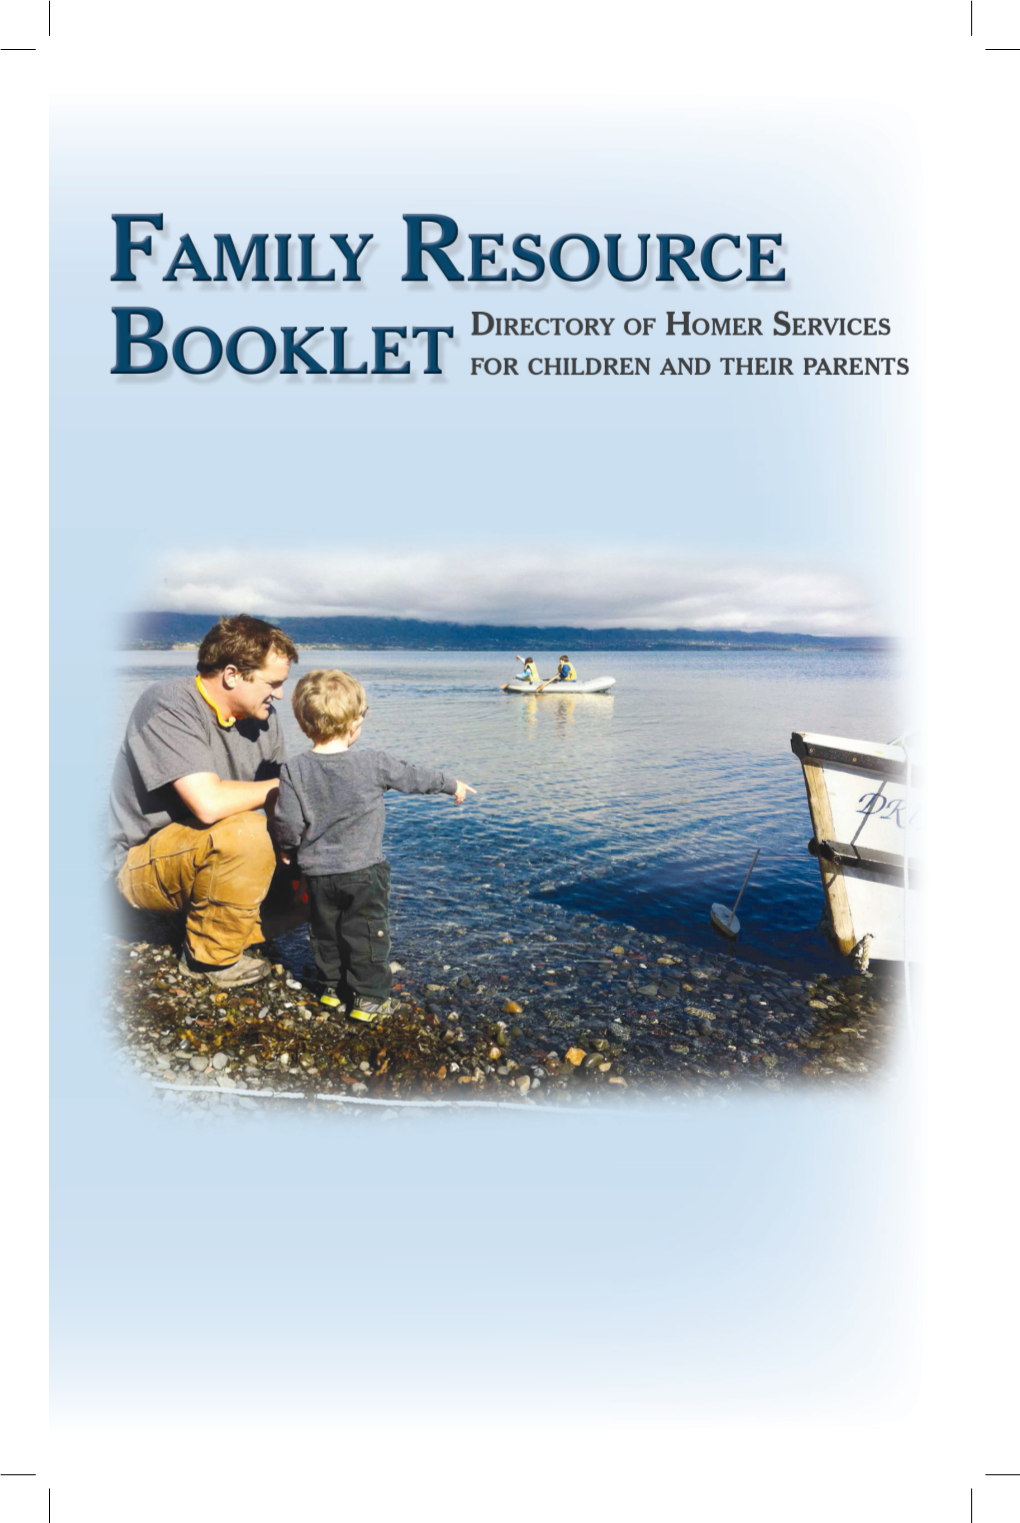 Family Resource Booklet Is a Guide to Resources Available in the Homer Area That Support Families